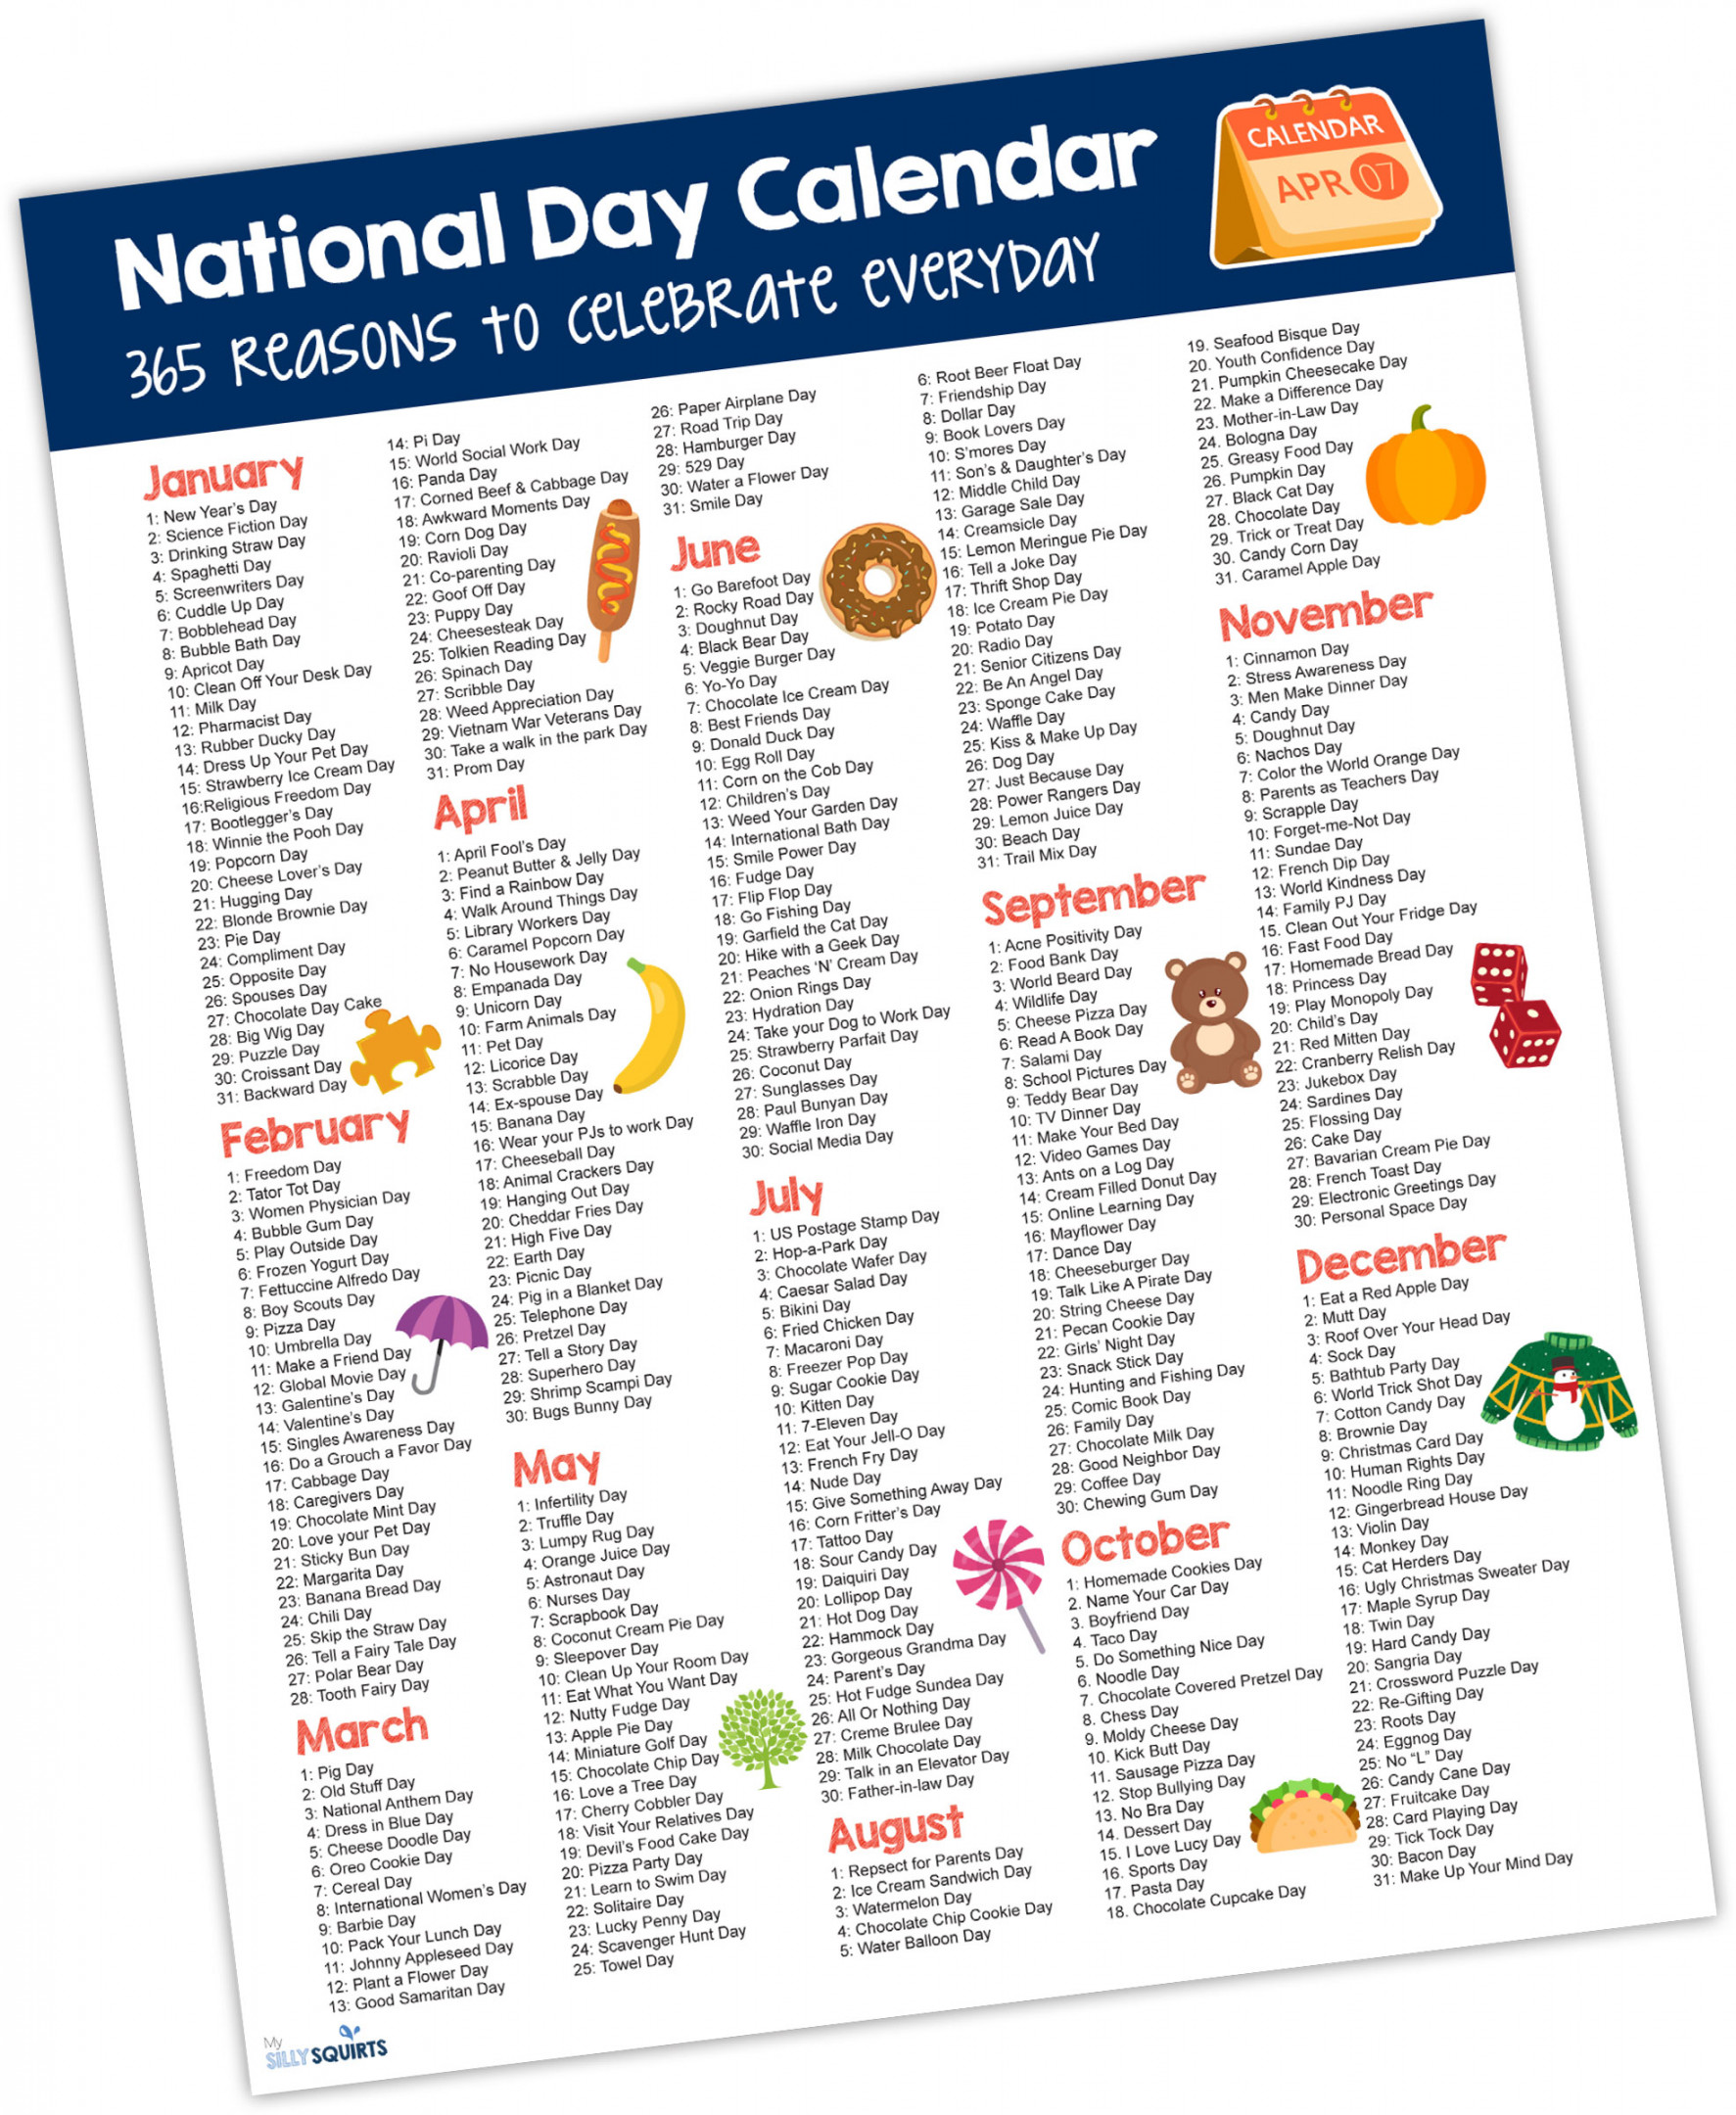 National Day Calendar:  reasons to celebrate everyday - My